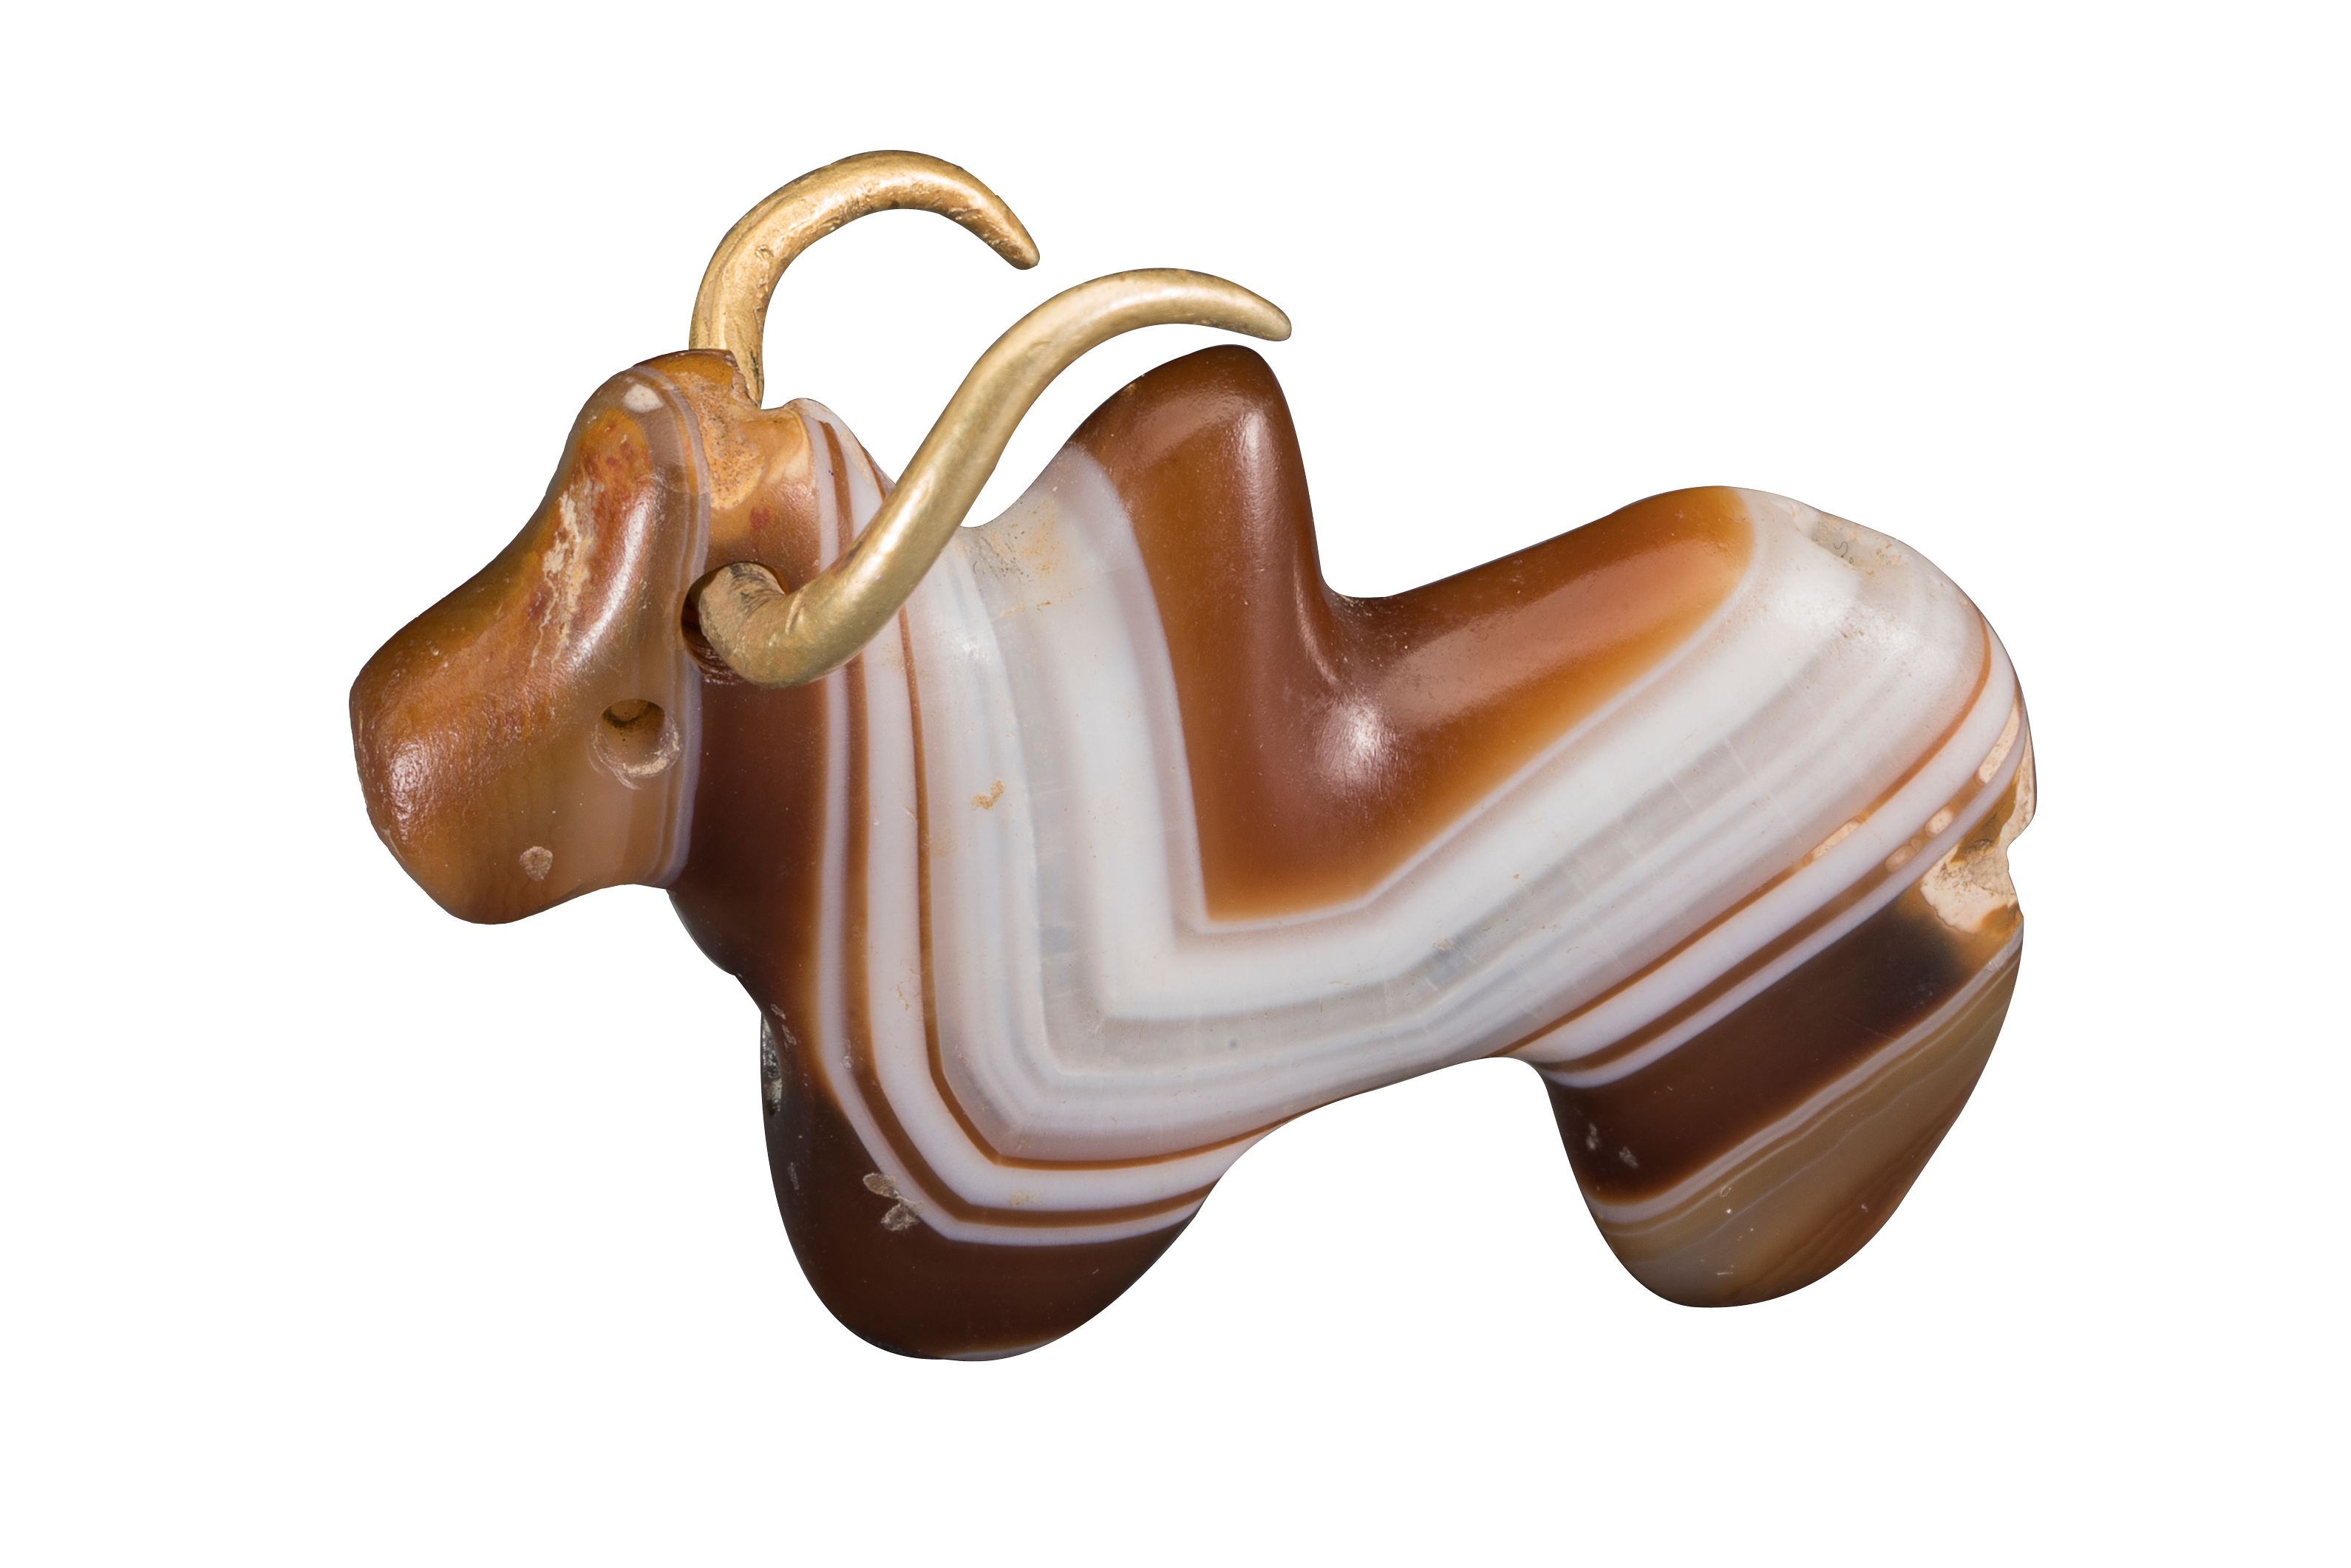 Humped Bull of banded agate with gold horns, circa 1800 BC, Bhiwani Khera, Haryana ©Directorate of Archaeology and Museums, Government of Haryana